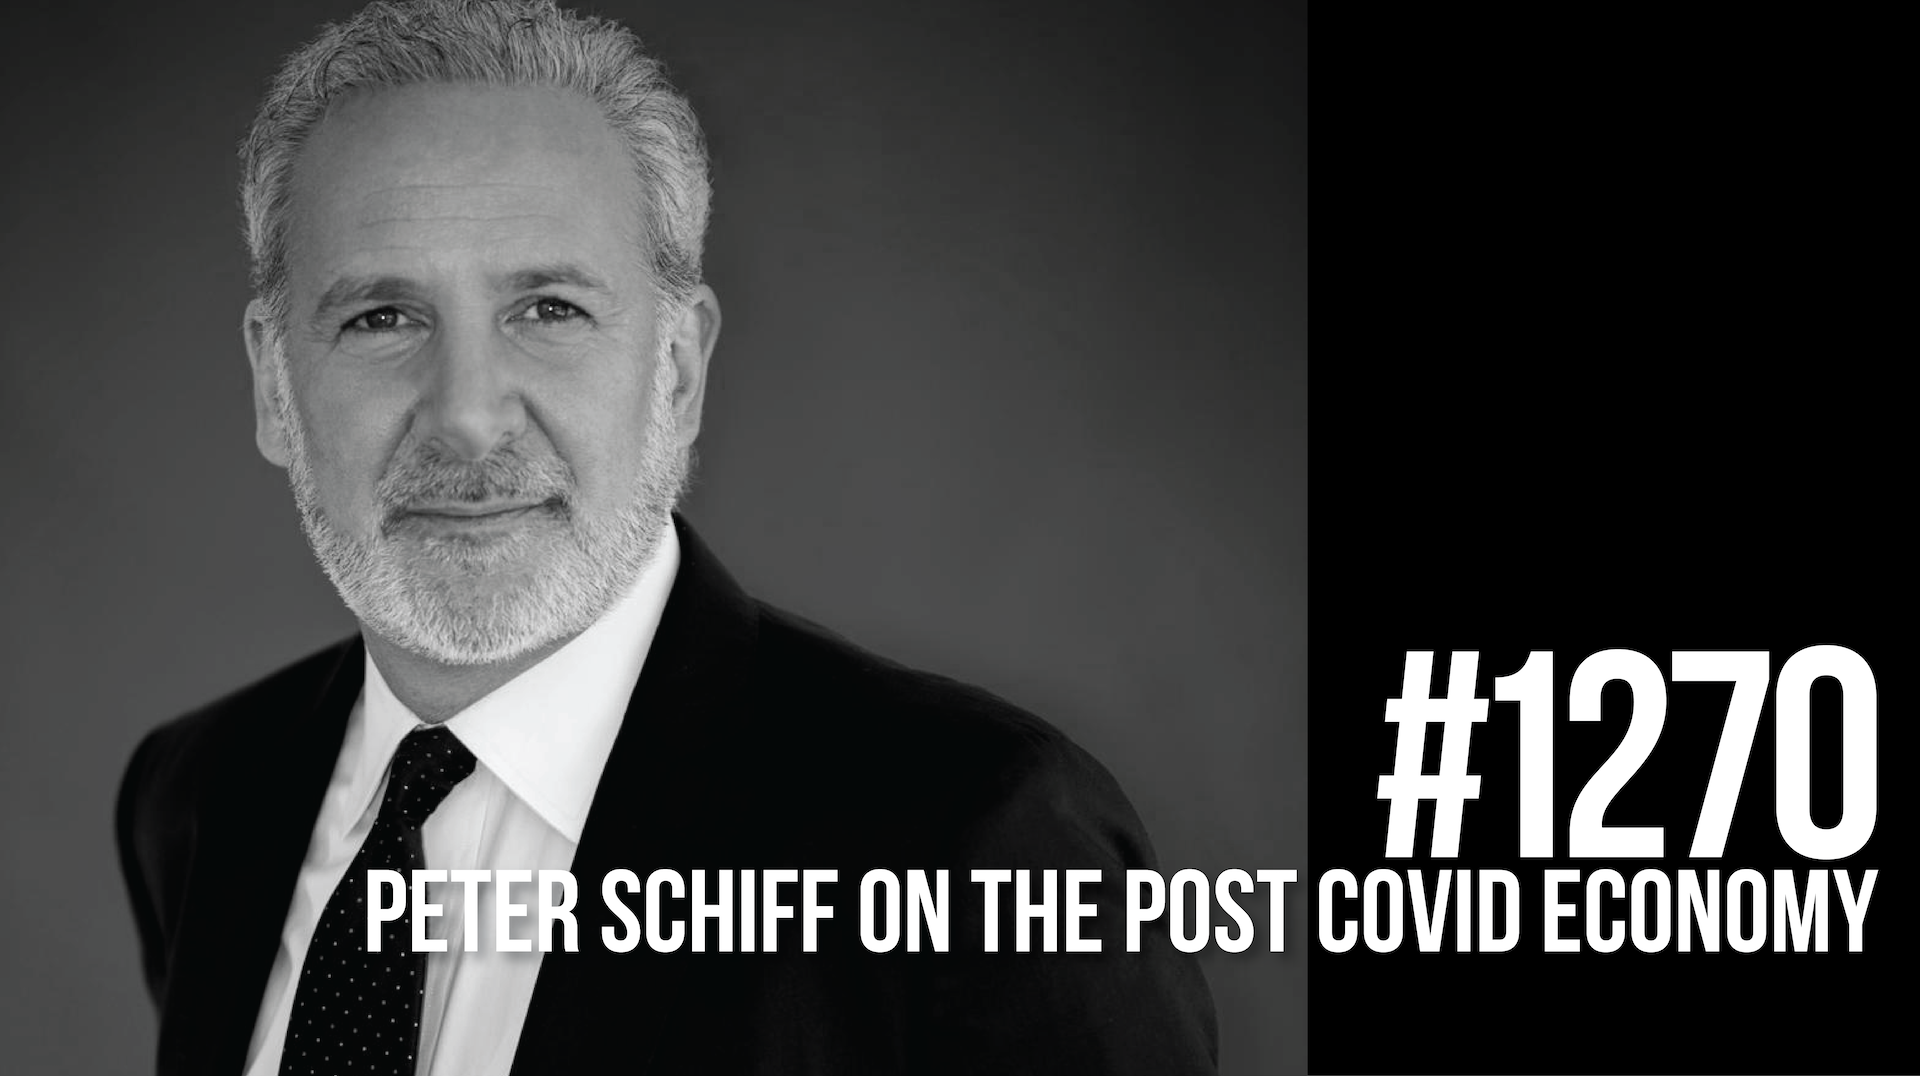 1270: Peter Schiff on the Post COVID-19 Economy & How to Thrive